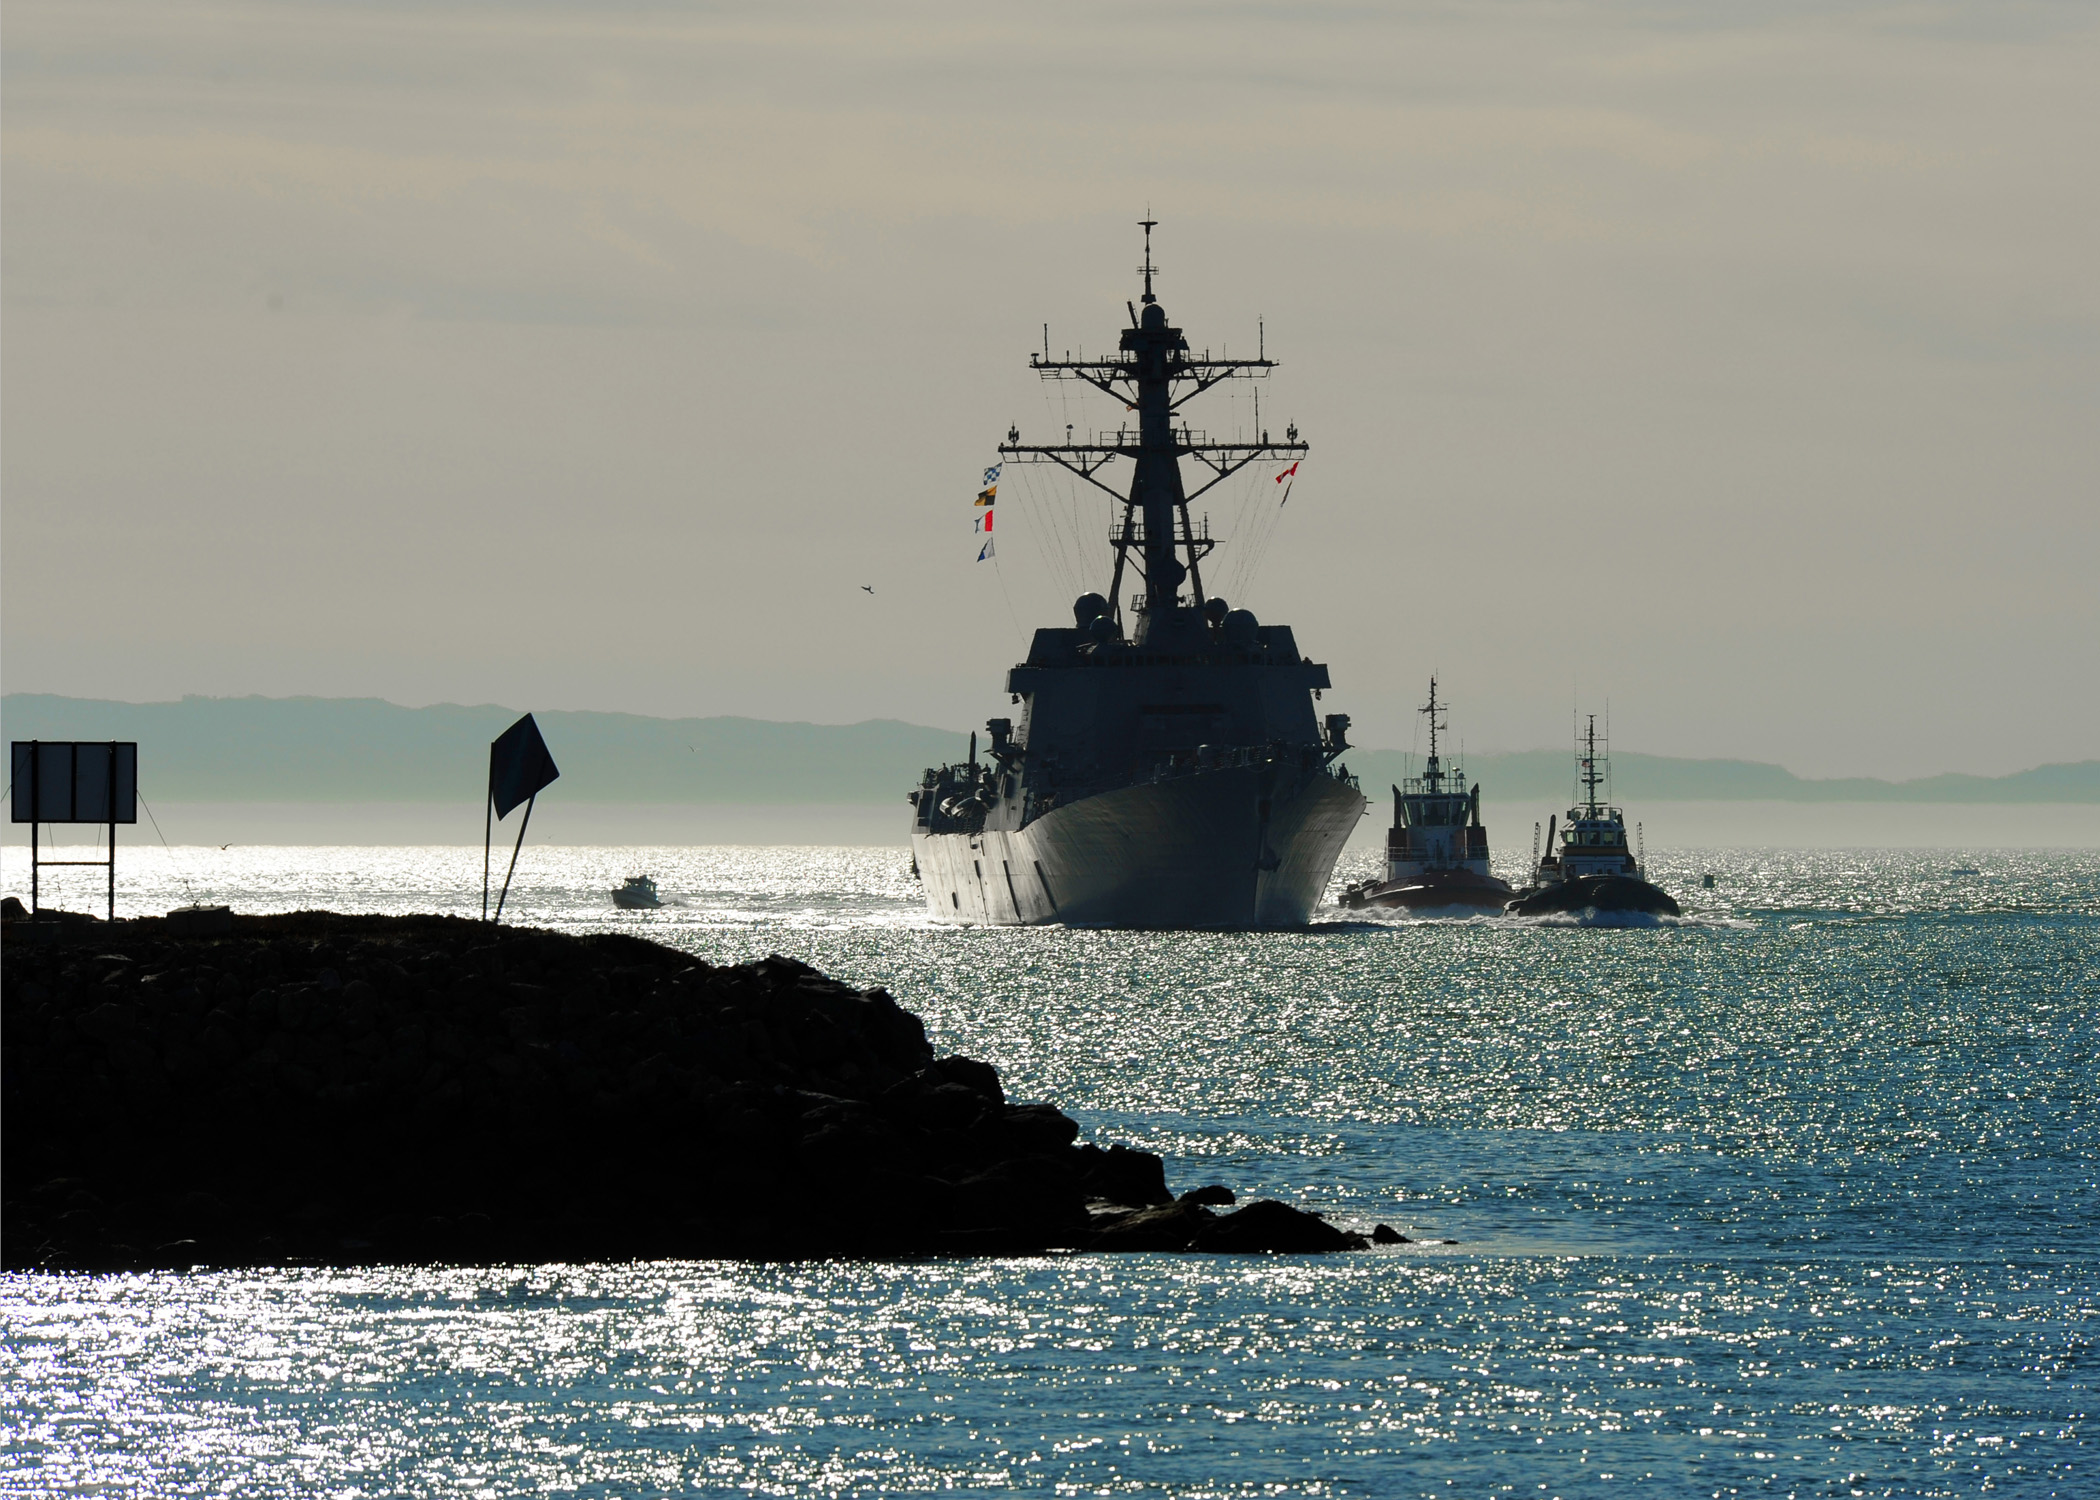 US_Navy_120109-N-YM863-034_The_Arleigh_Burke-class_guided-missile_destroyer_USS_Spruance_%28DDG_111%29_arrives_at_Naval_Weapons_Station_Seal_Beach_to_c.jpg